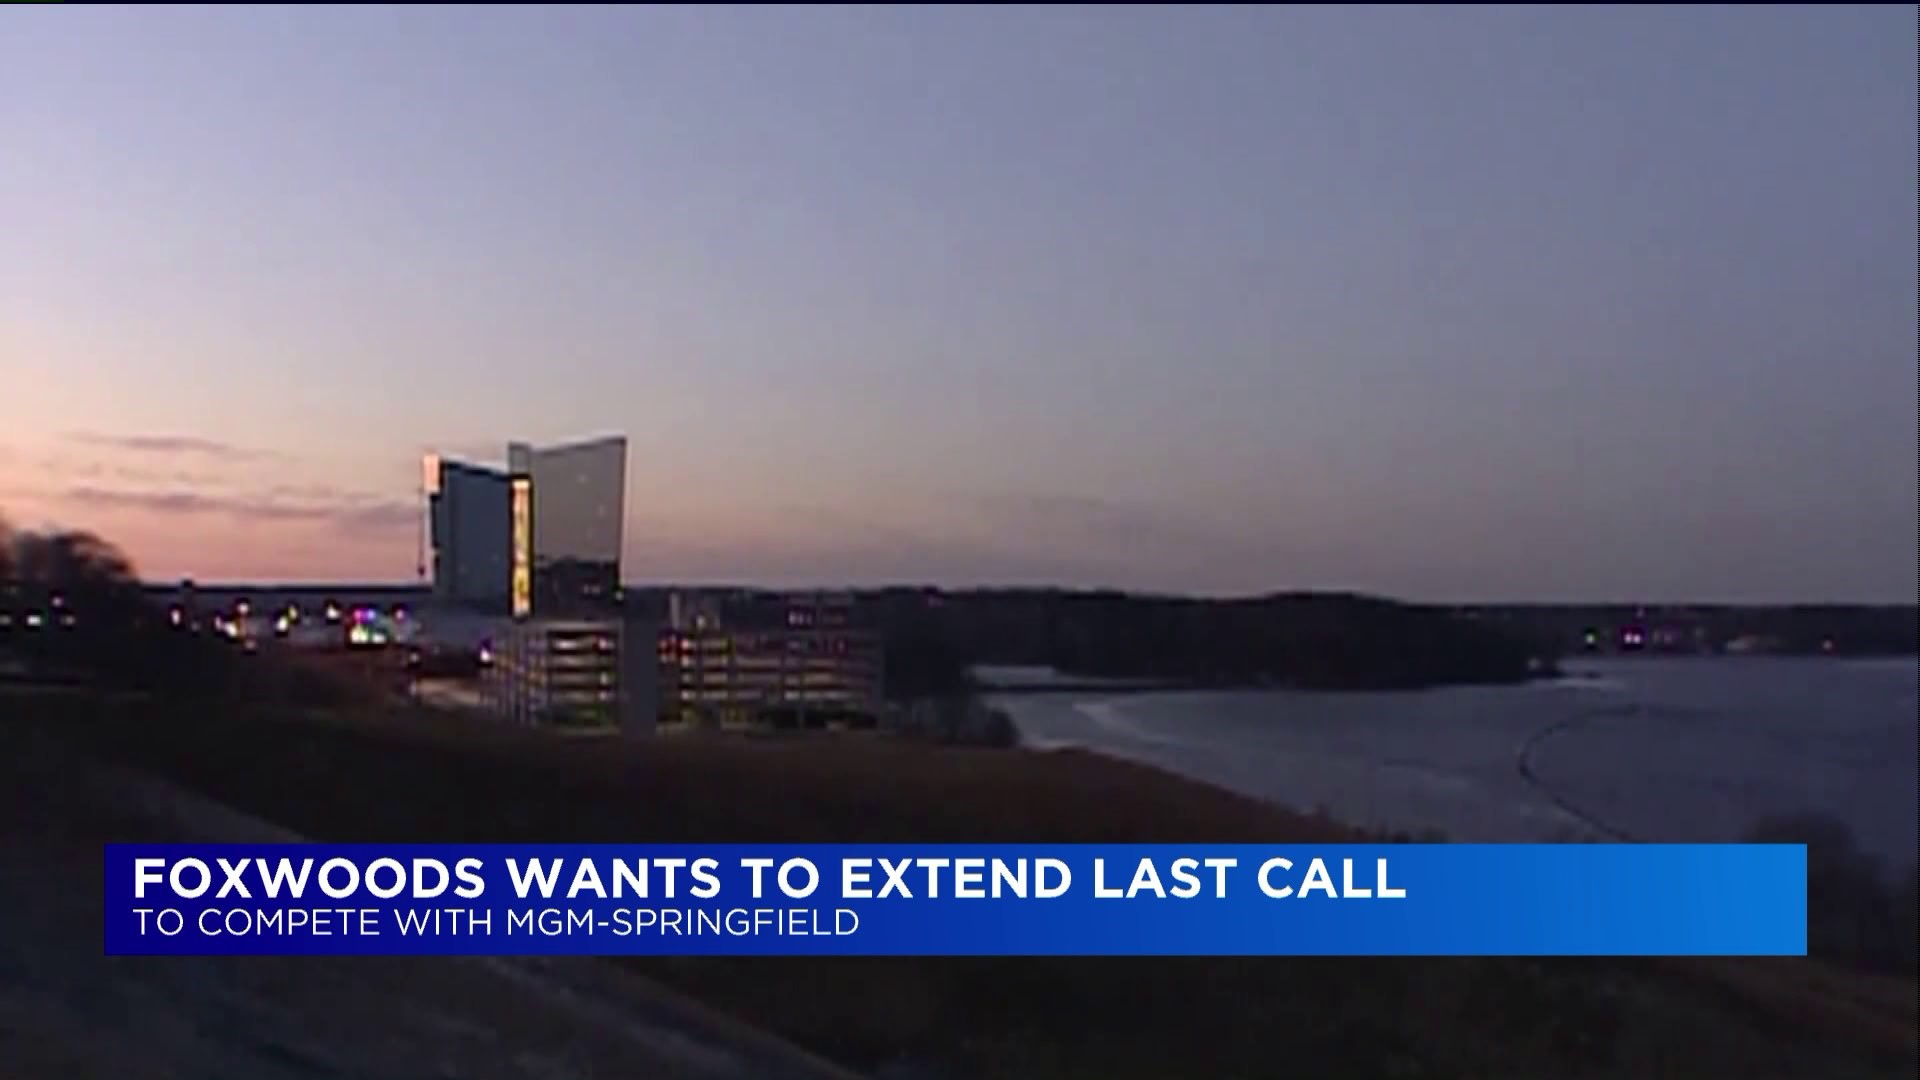 Foxwoods wants to extend last call